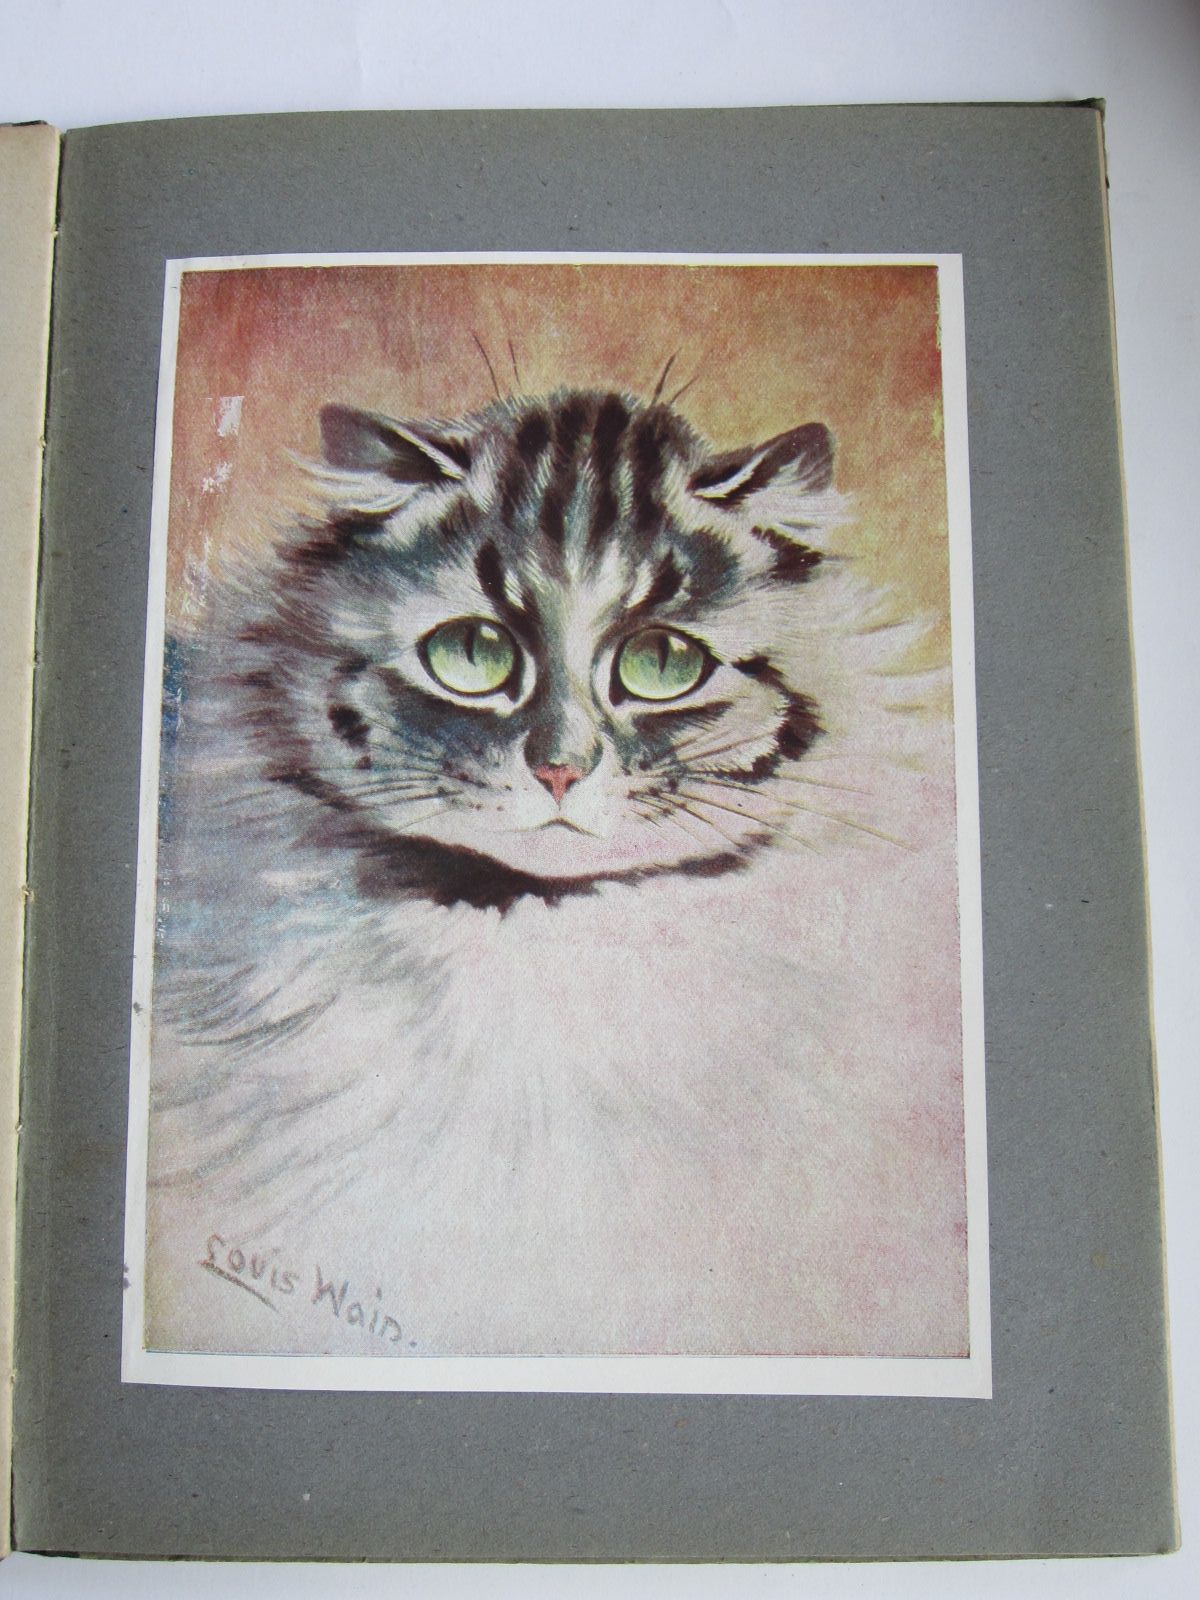 Photo of LOUIS WAIN'S FATHER CHRISTMAS illustrated by Wain, Louis published by John F. Shaw & Co Ltd. (STOCK CODE: 1309075)  for sale by Stella & Rose's Books